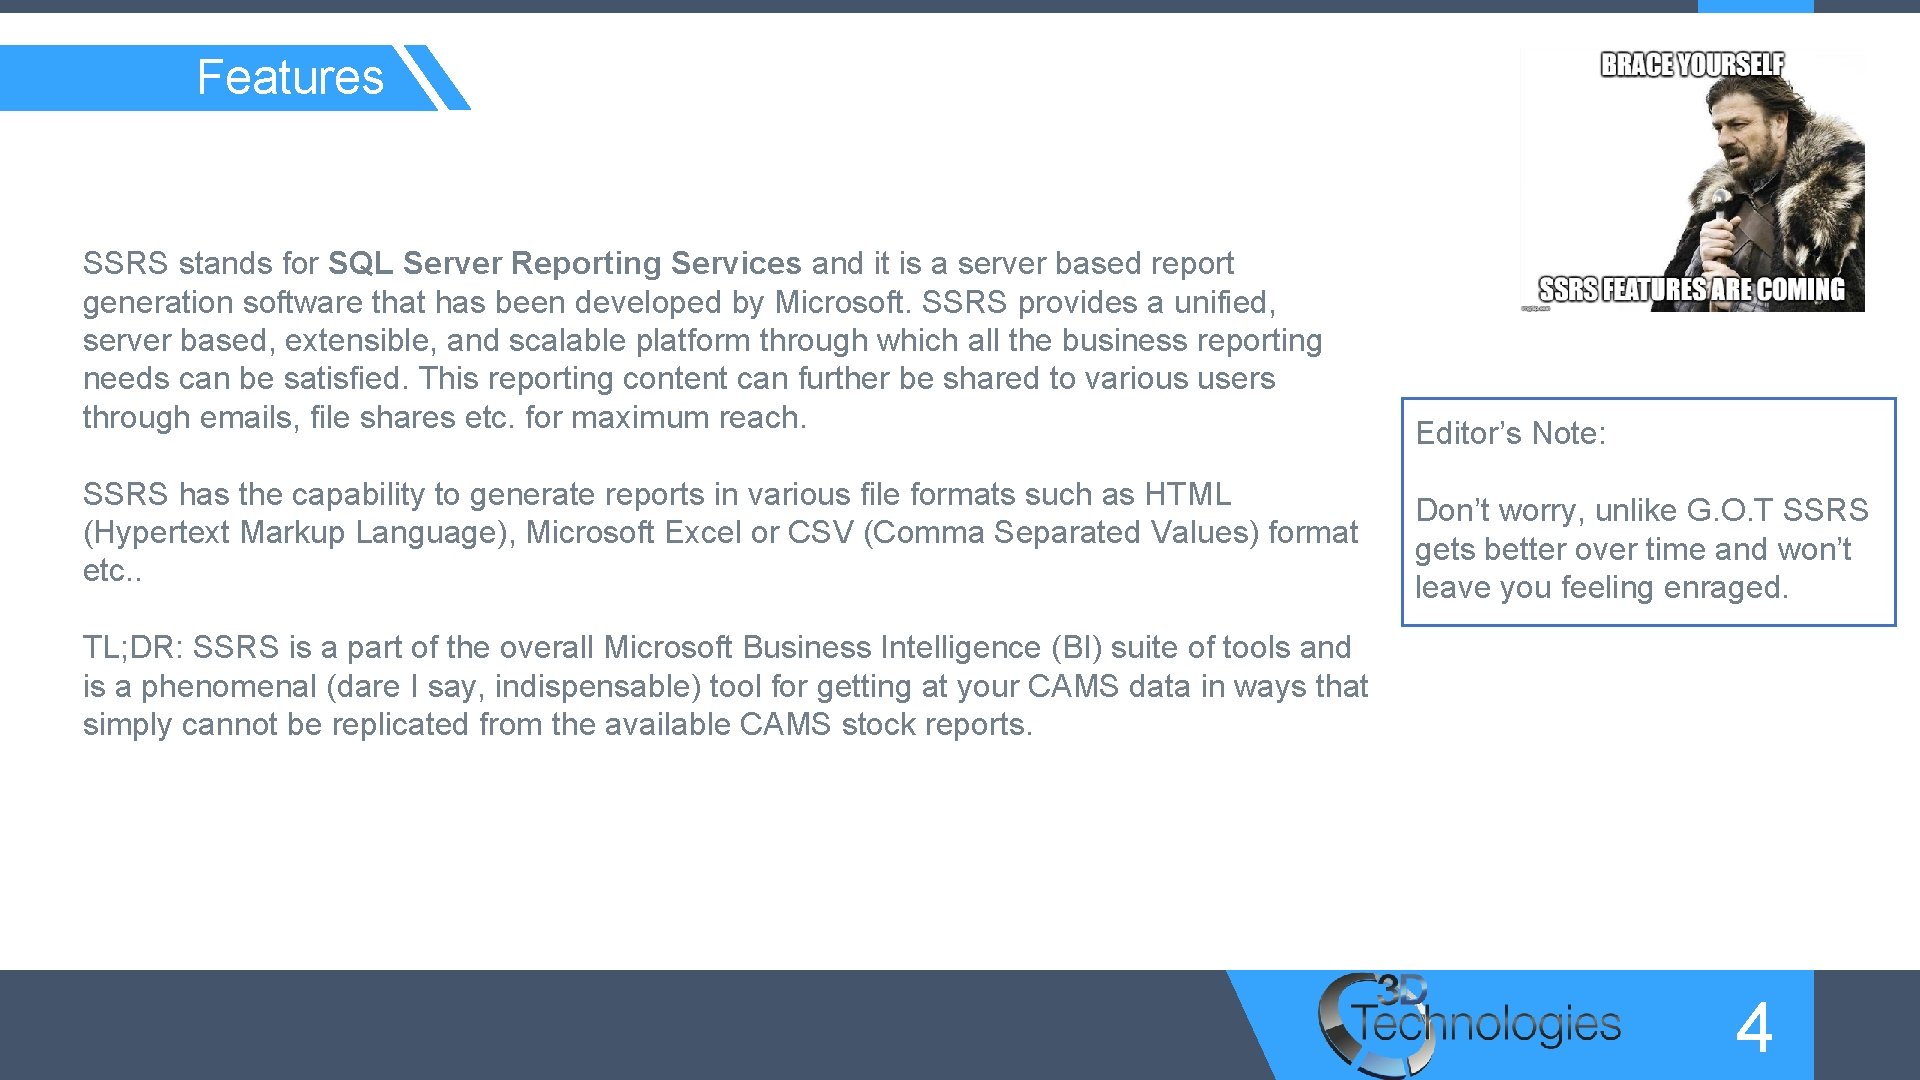 Features SSRS stands for SQL Server Reporting Services and it is a server based